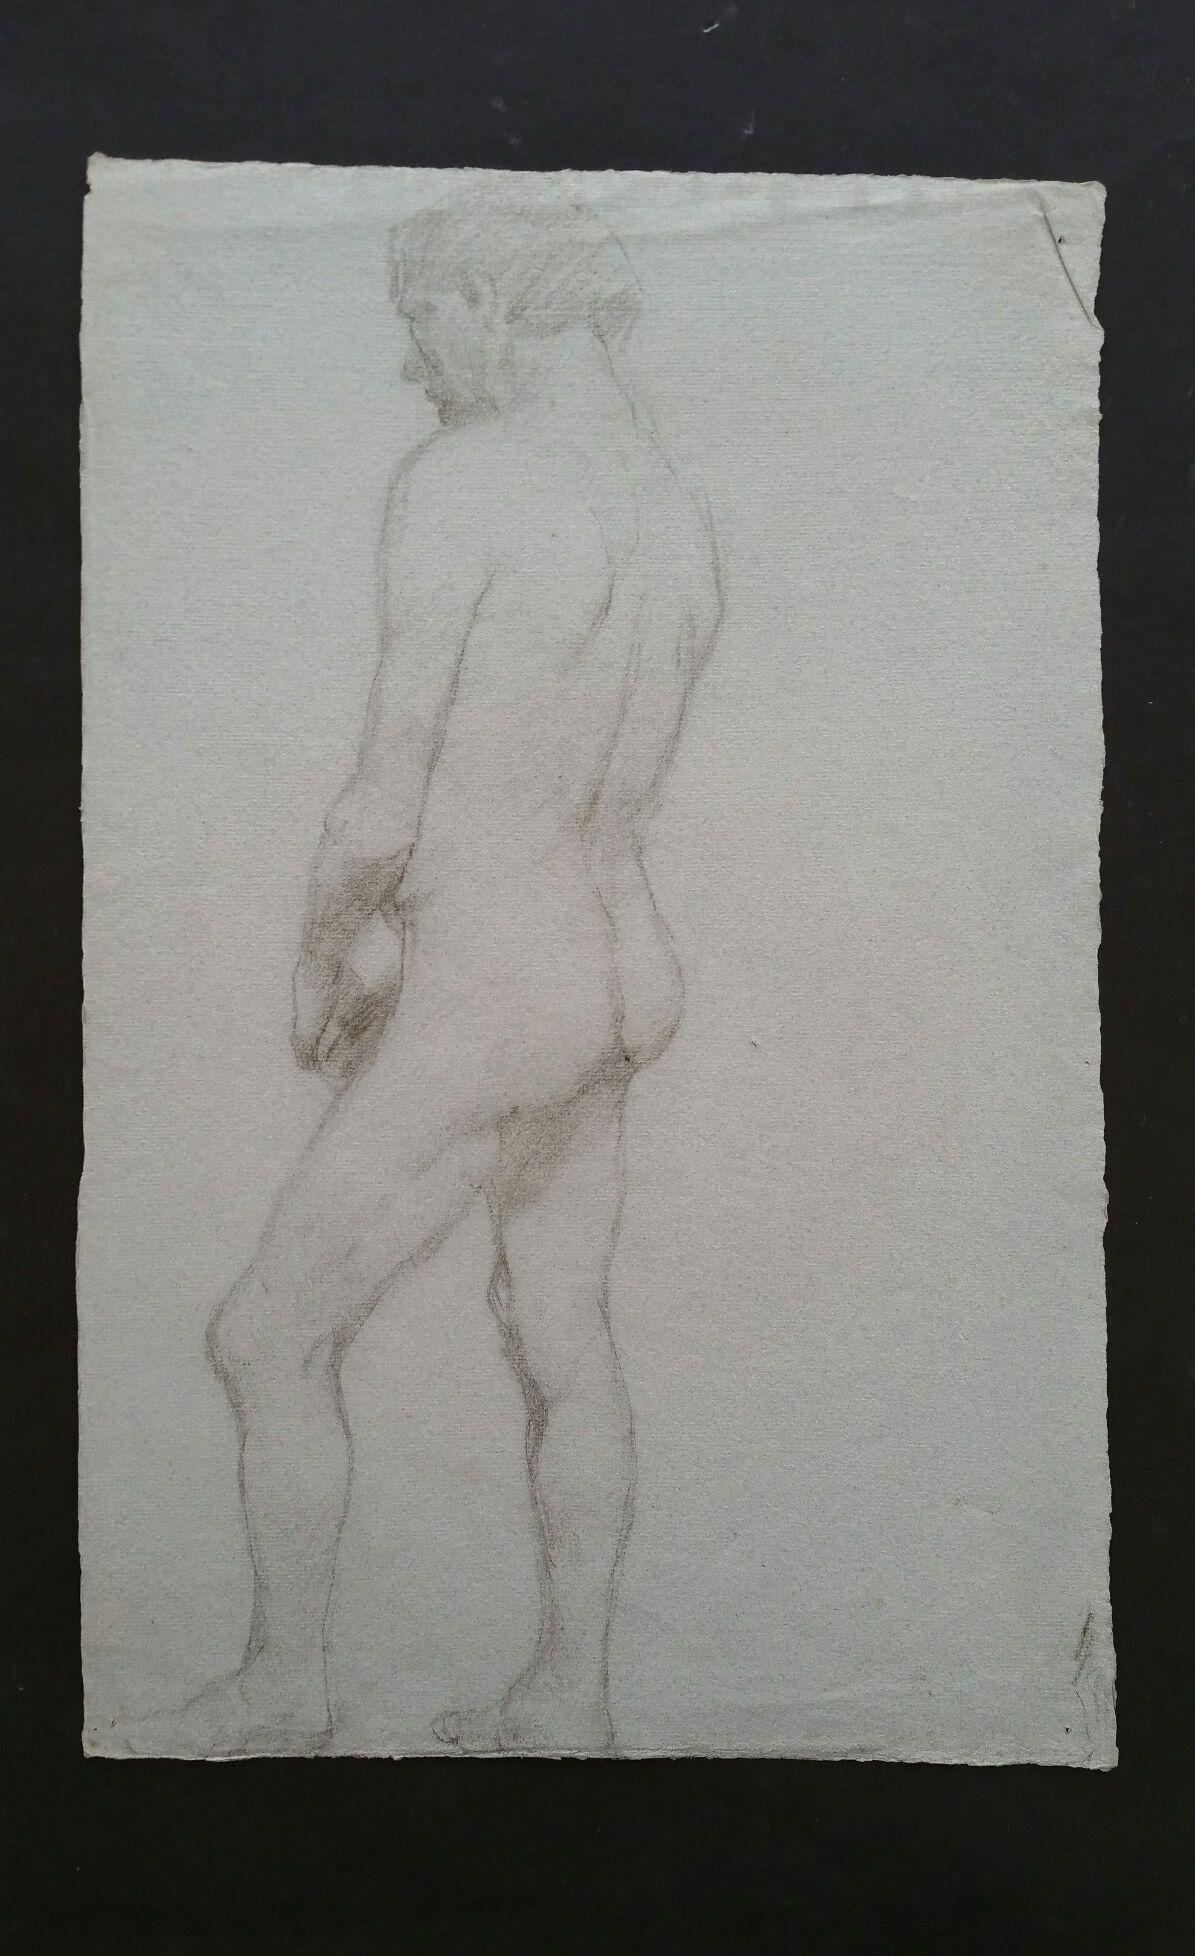 English graphite sketch of a male nude, back view.
by Henry George Moon (British 1857-1905).
On pale blue/grey artists paper, unframed.
Measurements: sheet 18.75 x 12 inches.

Provenance: from the artists estate.

Condition report: pin holes